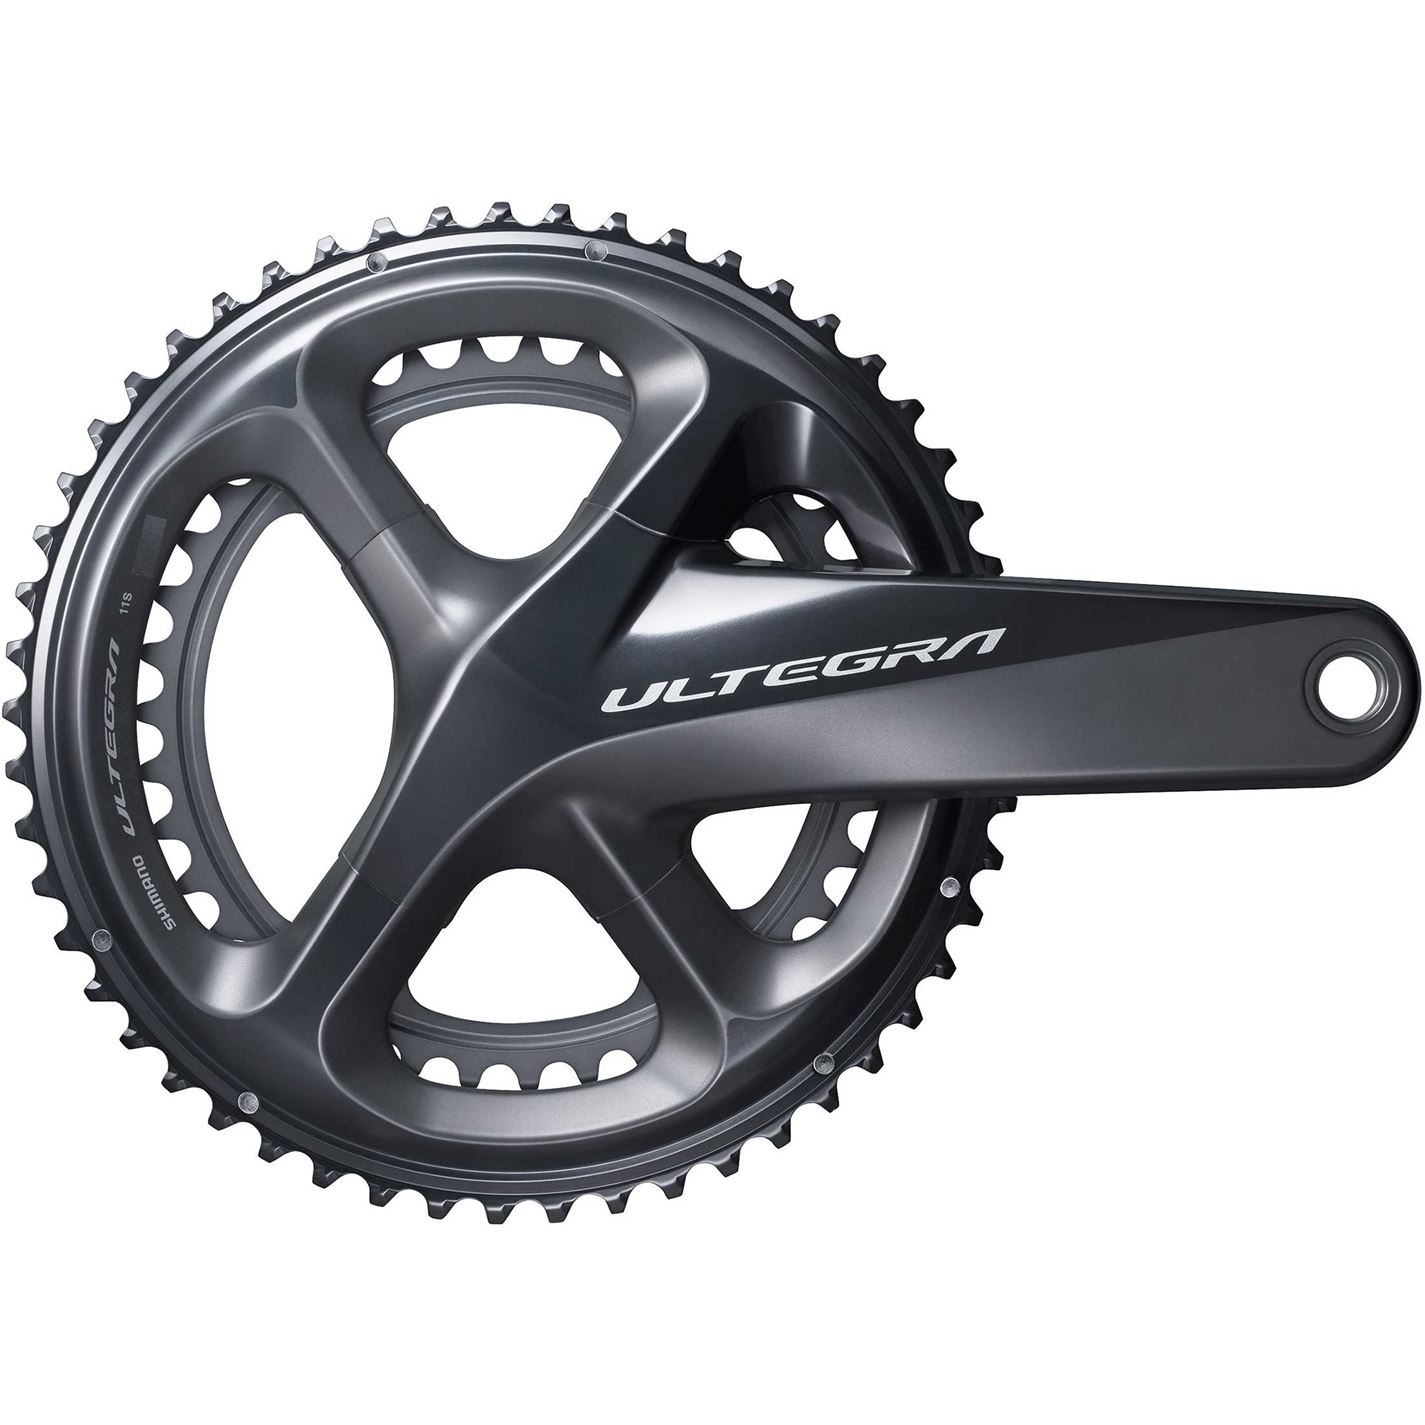 Shimano Ultegra R8000 Double Chainset - 11 Speed 52/36T, 170mm gri